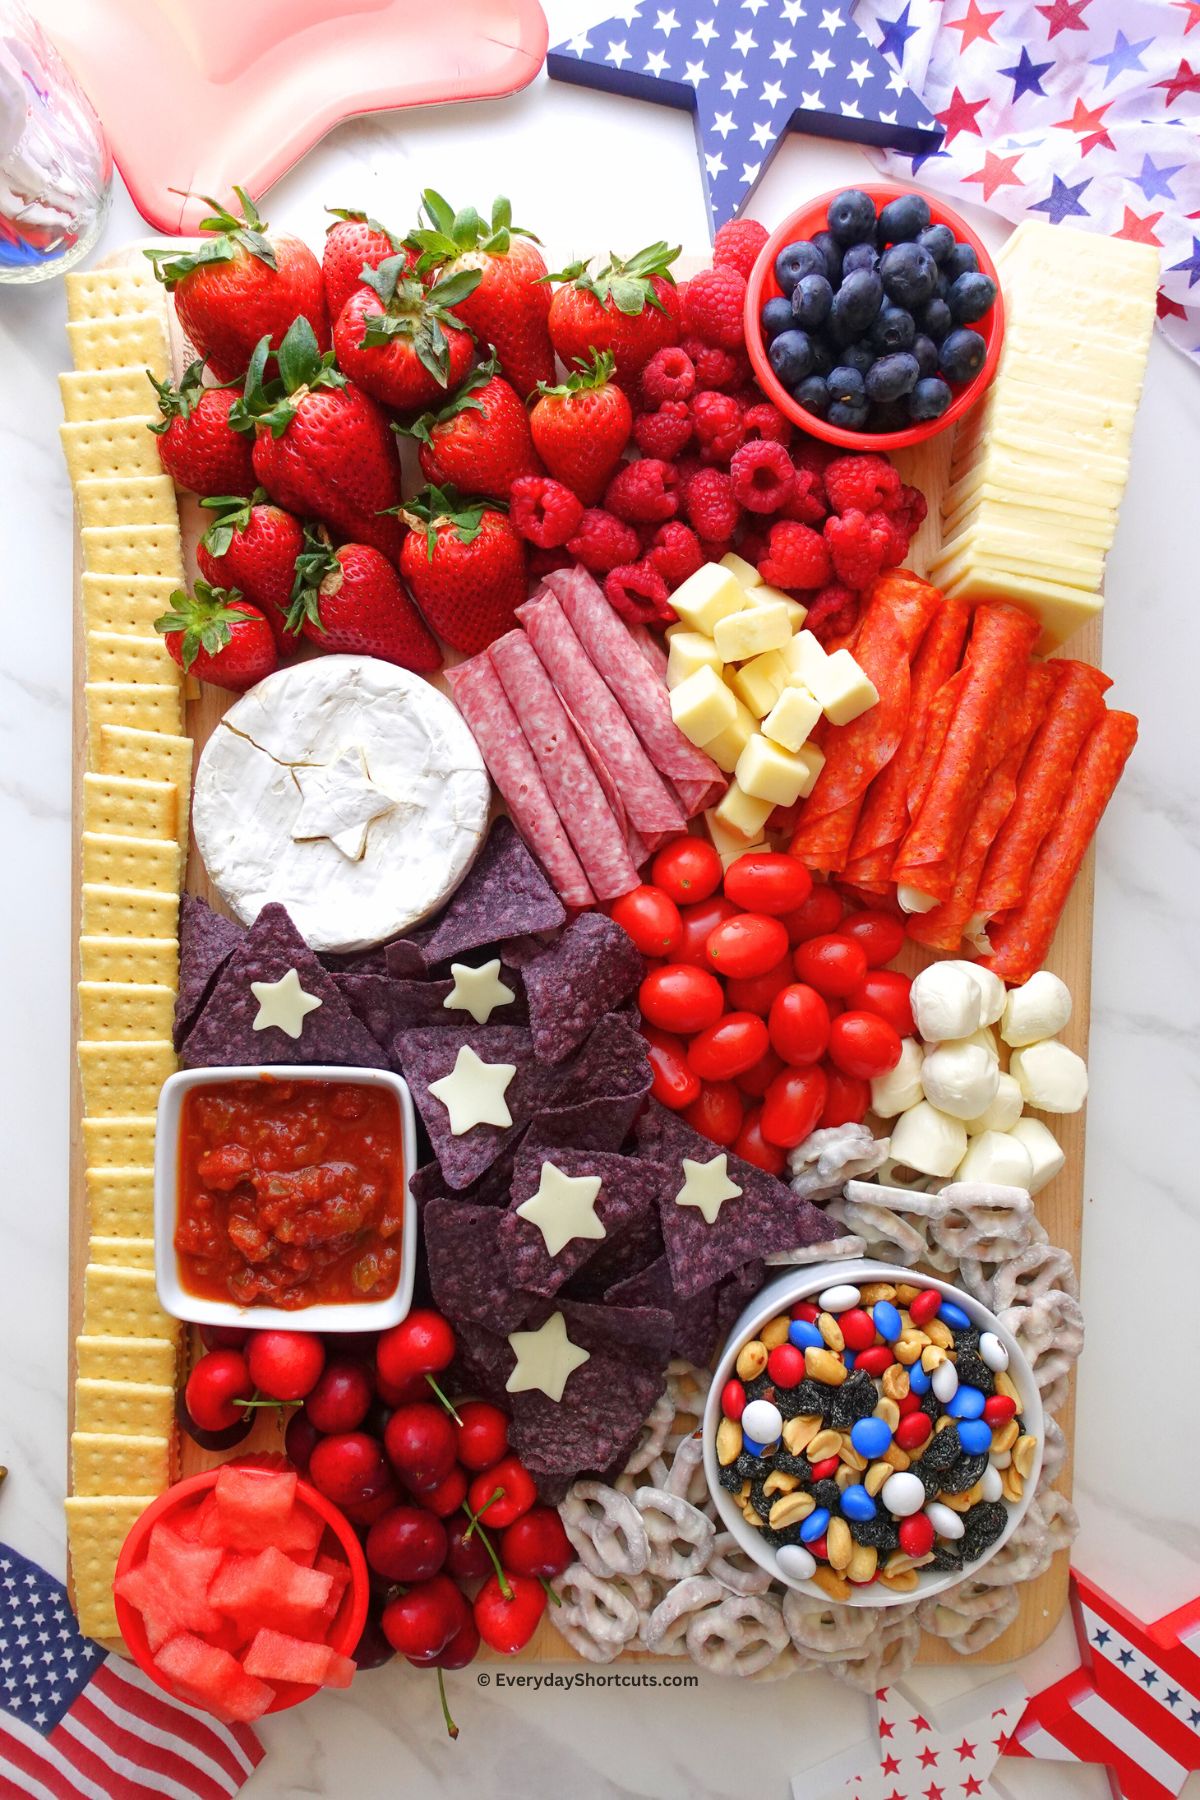 Patriotic Charcuterie Board from Everyday Shortcuts